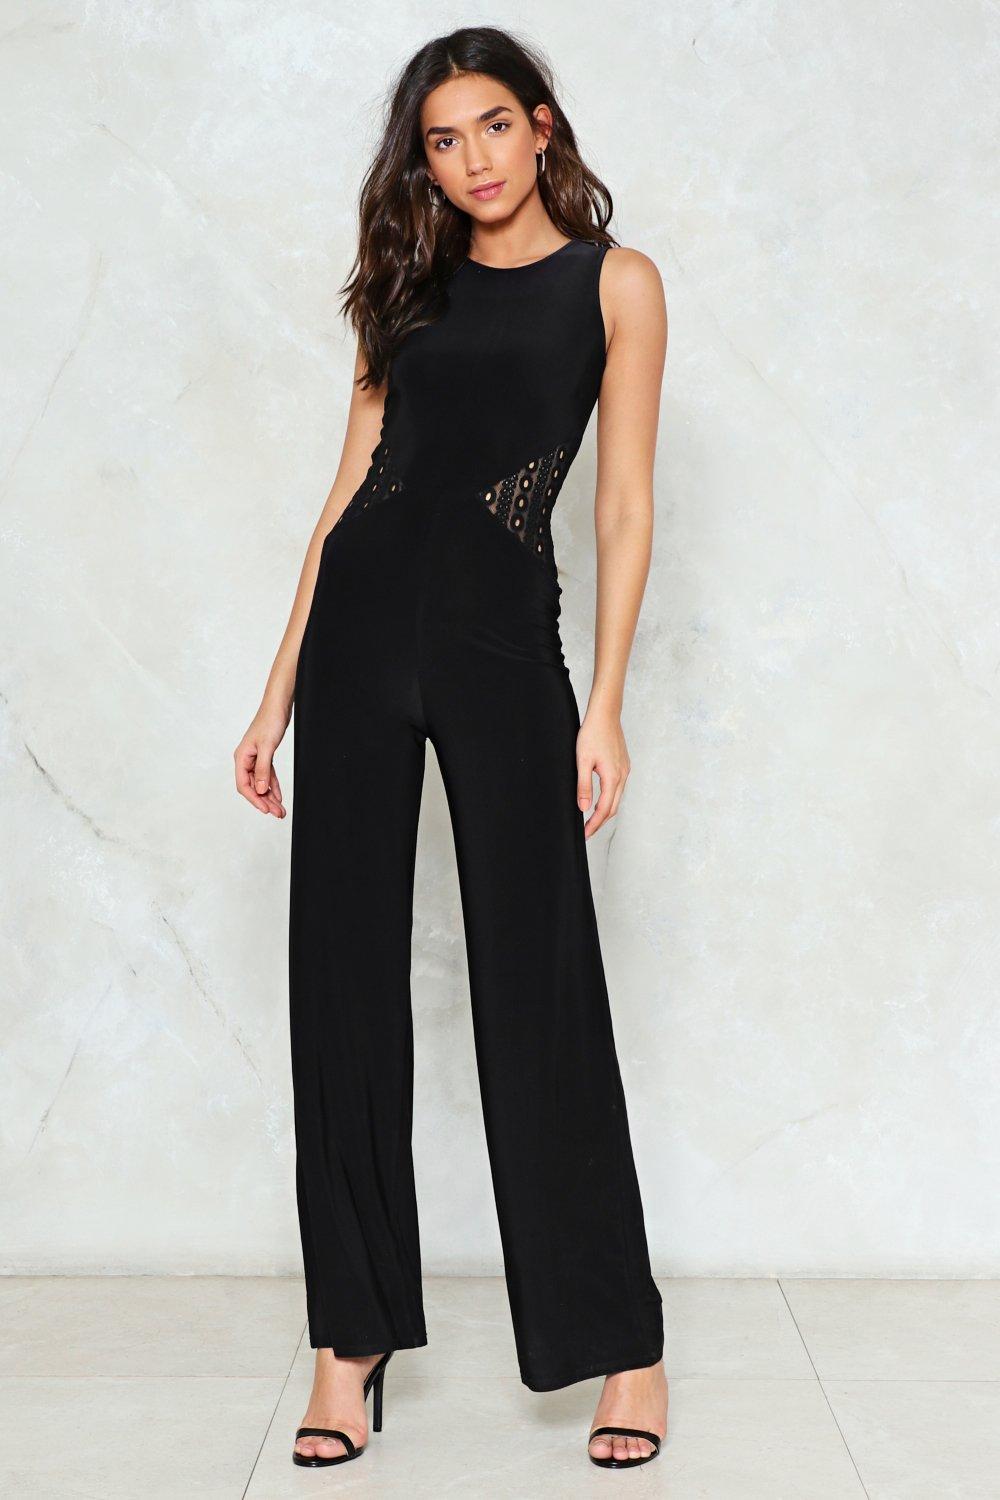 Got It in One Jumpsuit | Nasty Gal